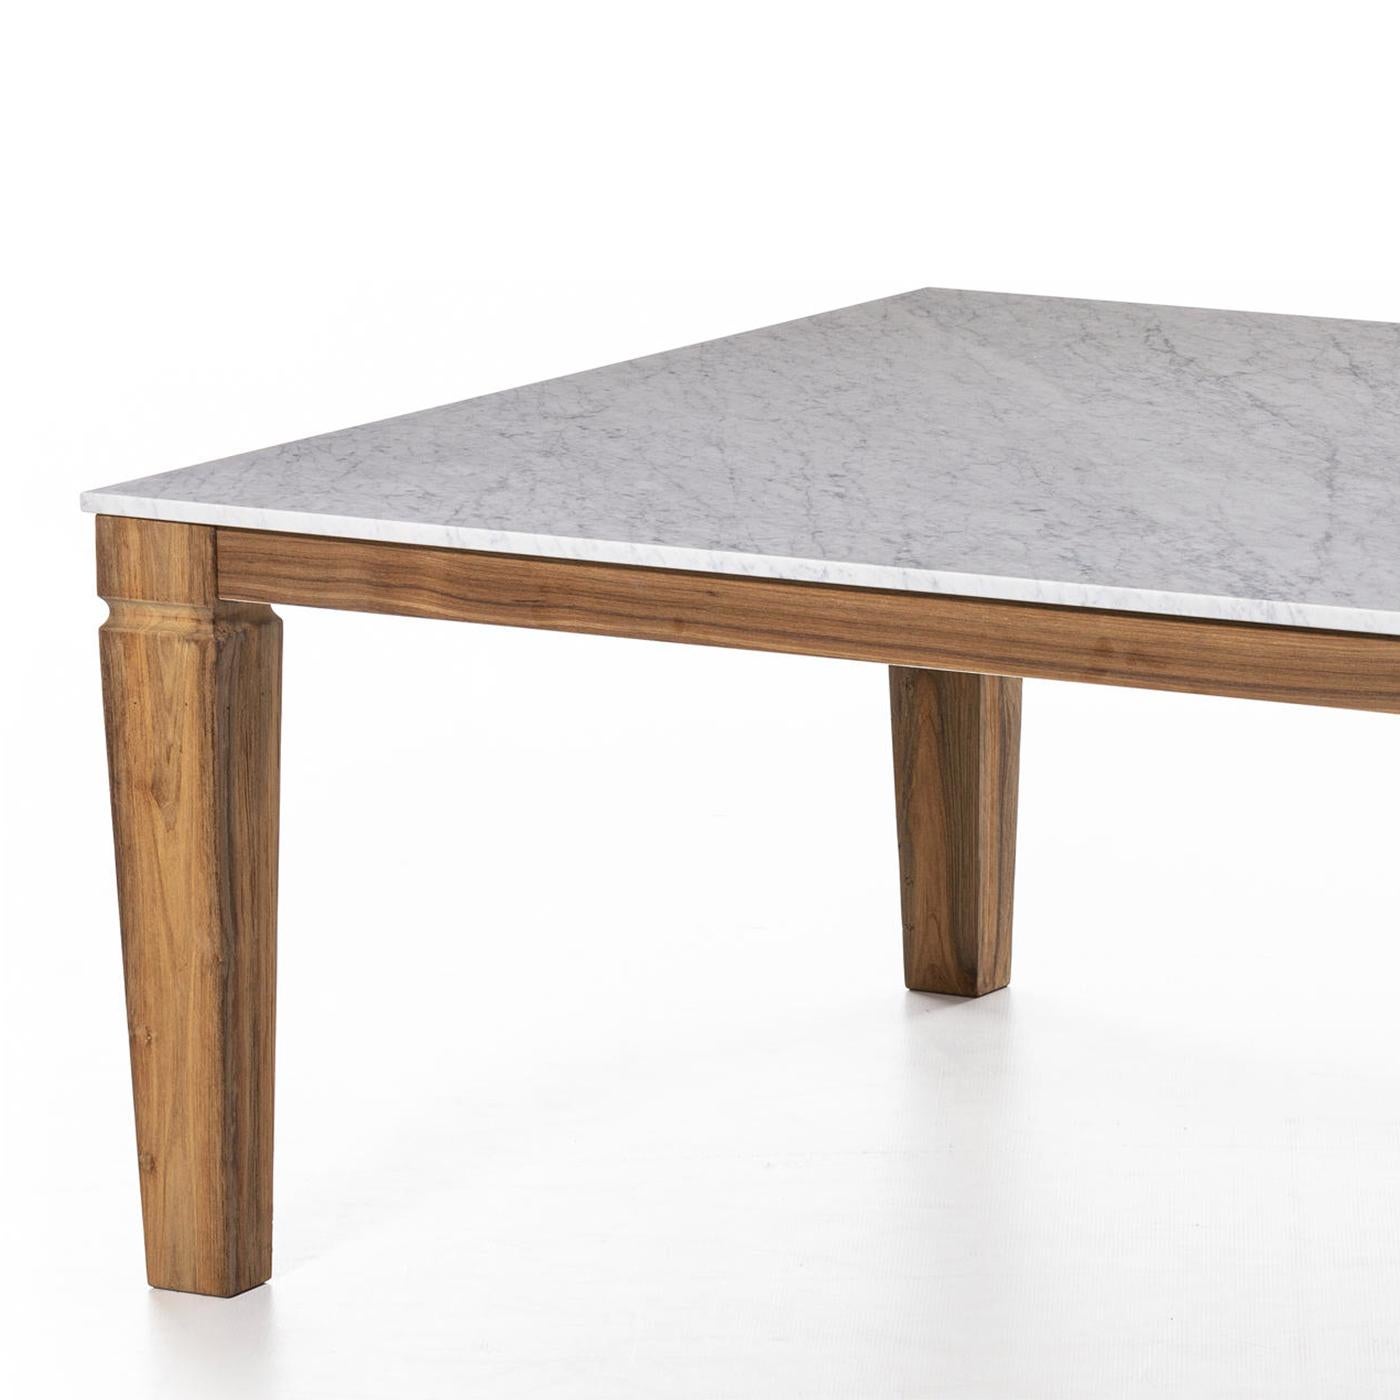 Dining Table Barletta square with structure in solid teak
wood and with polished carrare white marble top.